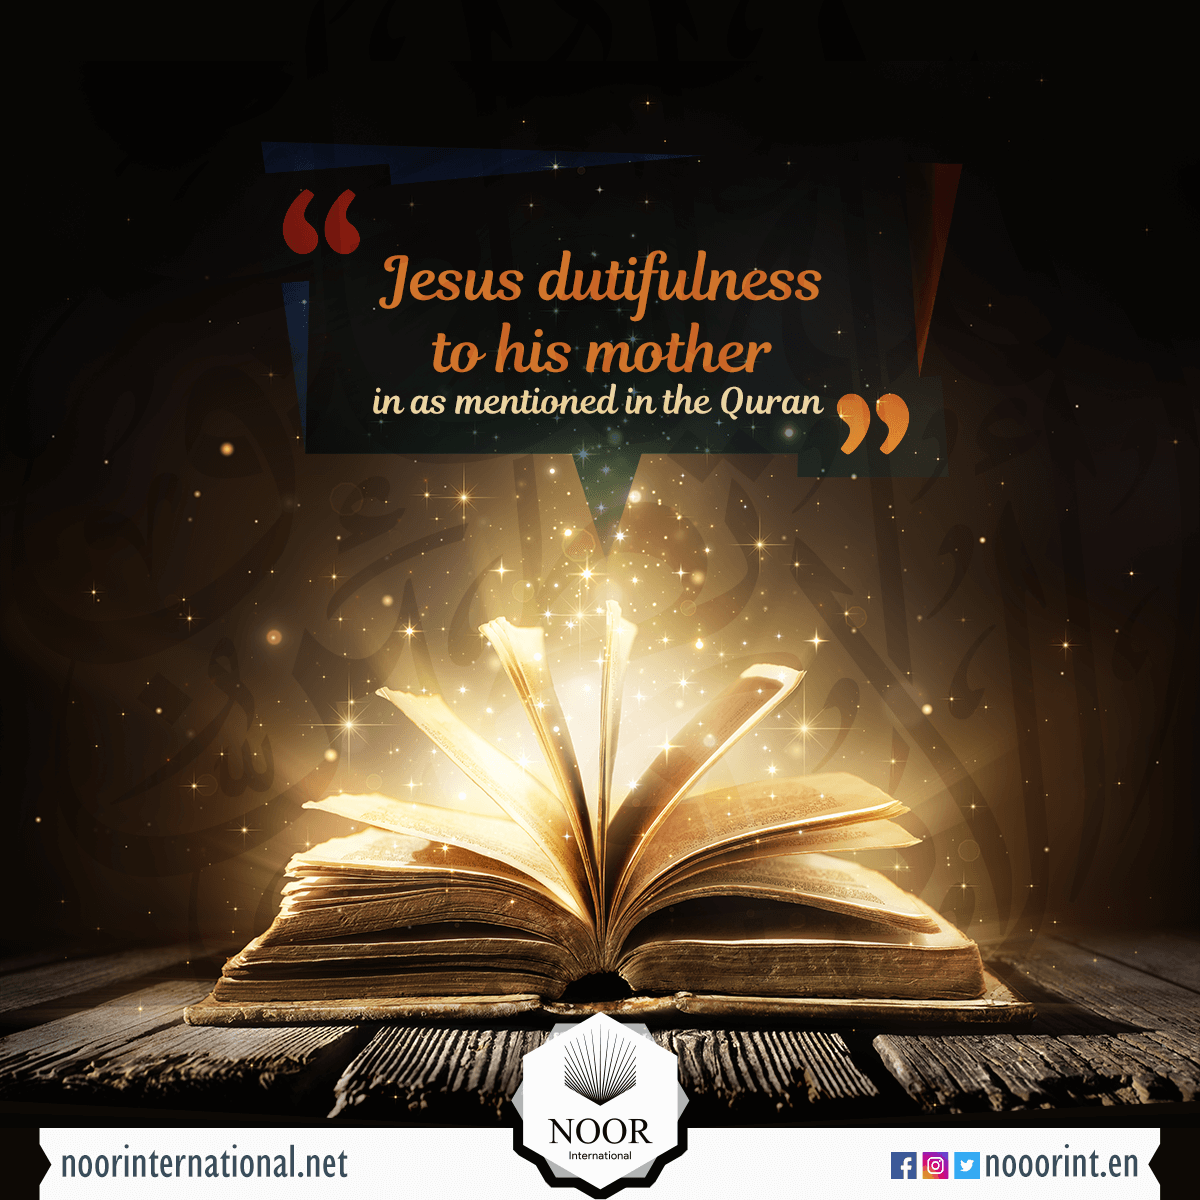 Jesus dutifulness to his mother in as mentioned in the Quran